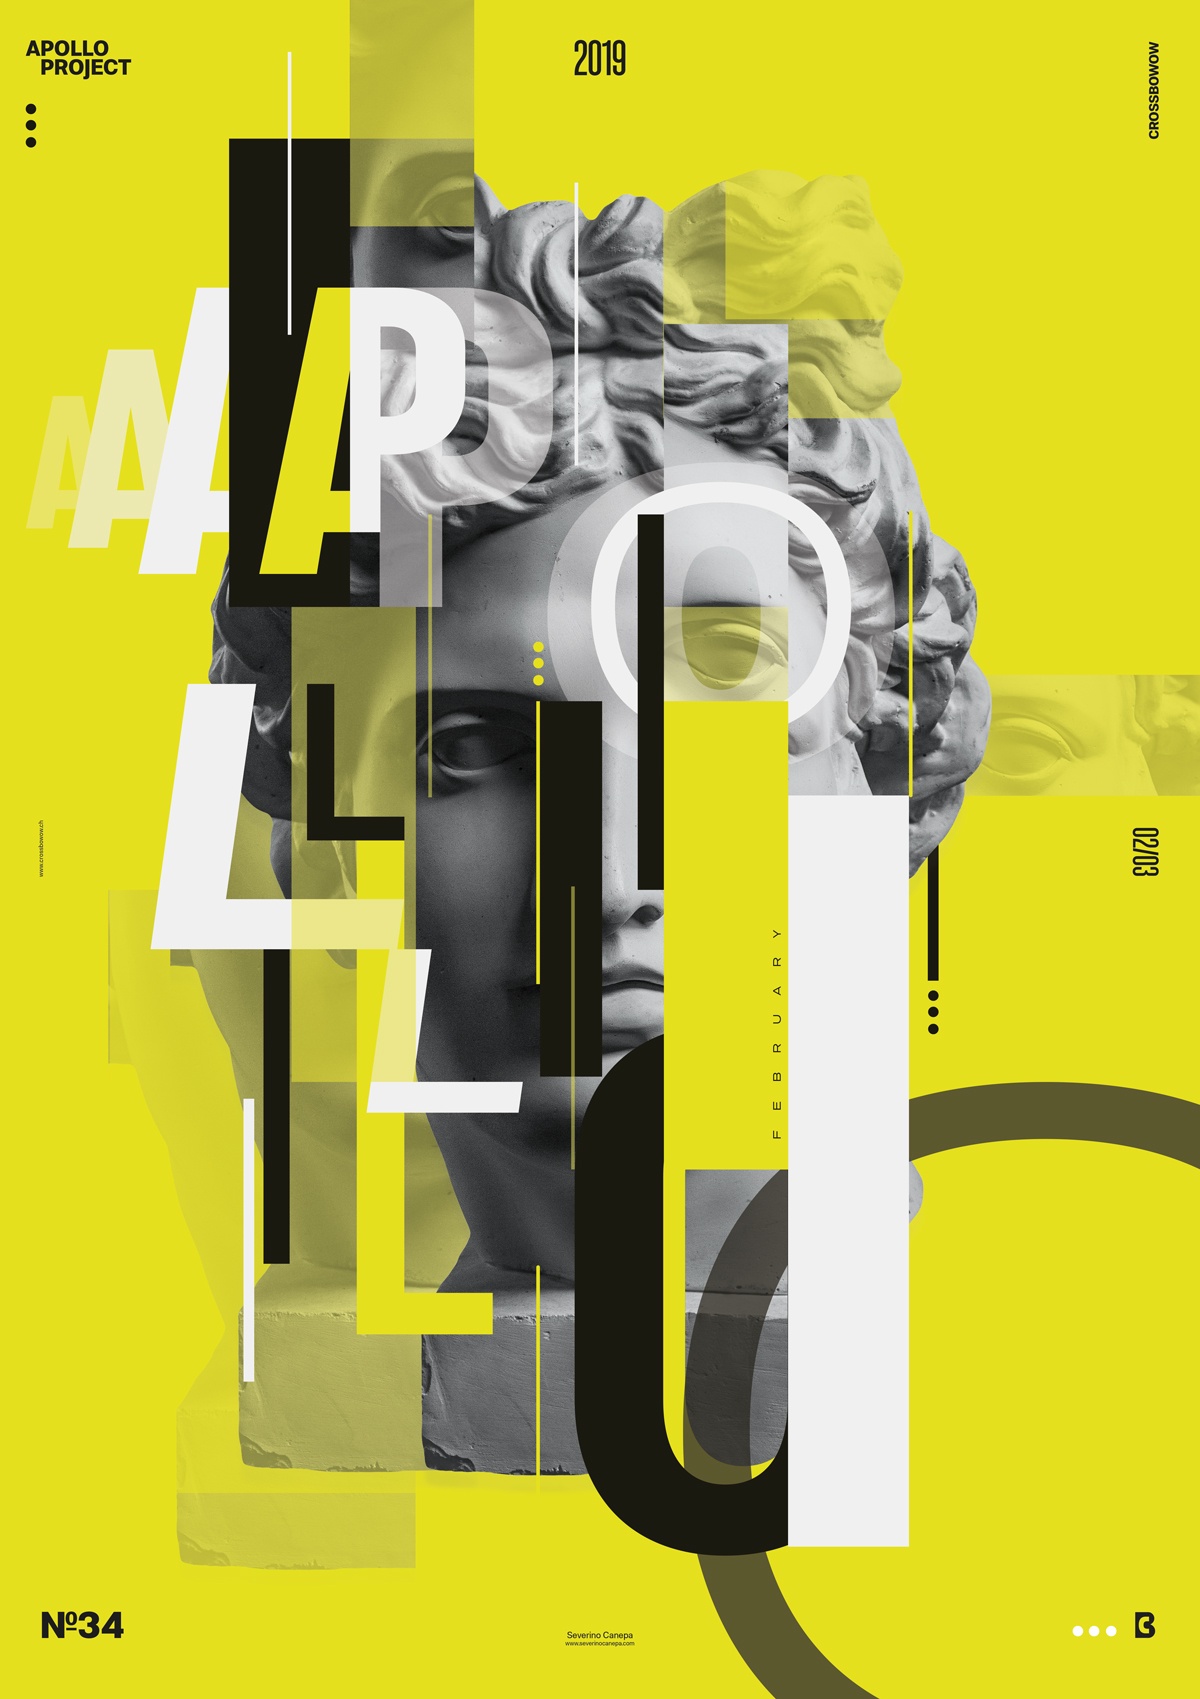 Visual of the Poster Design Creation #34 Yellow Futur